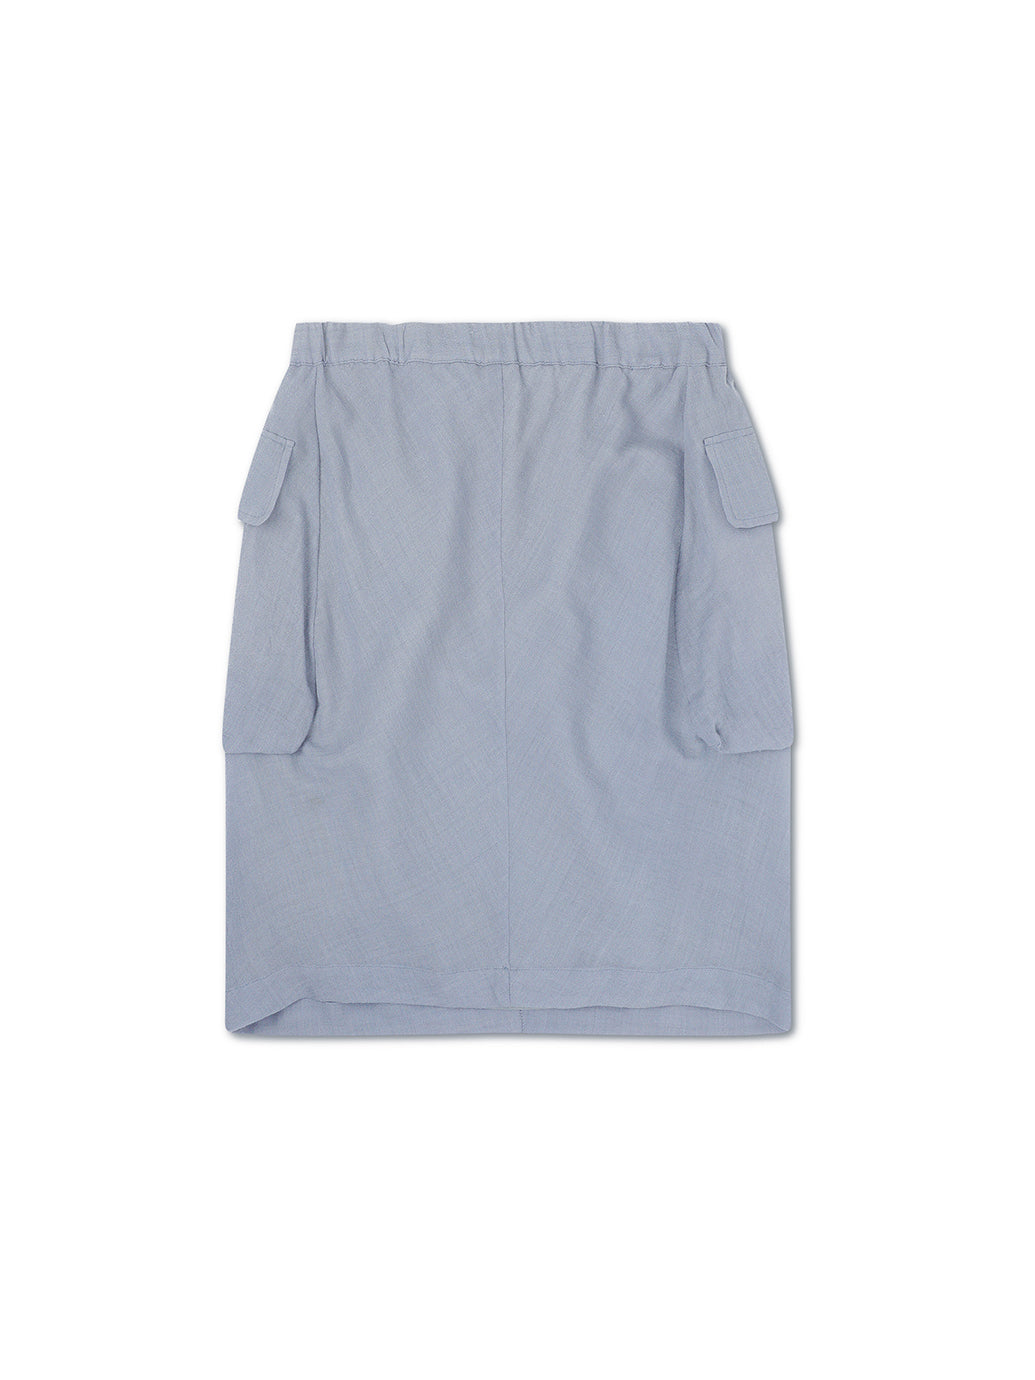 AD1994 Comme Des Garcons Tricot Wool Cargo Skirt